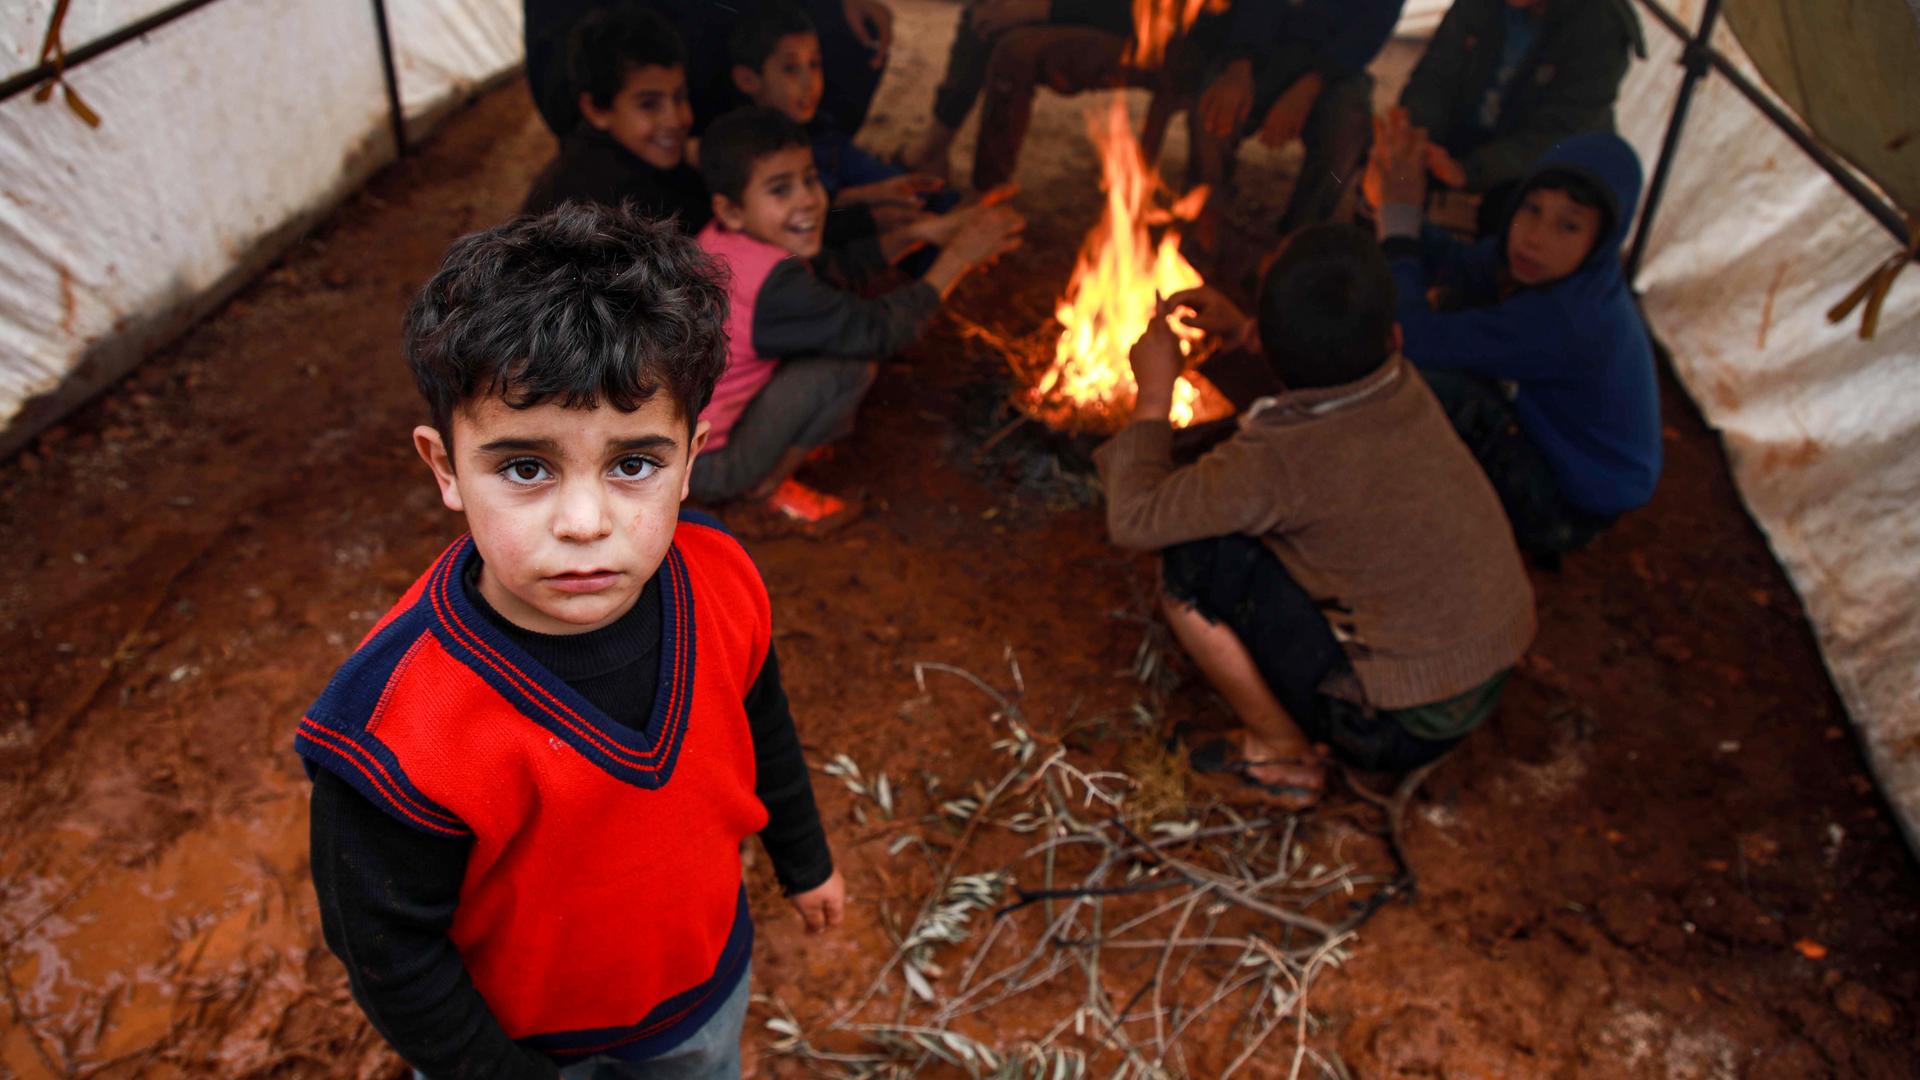 A boy looks on as other children behind sit by a fire inside a tent at a flooded camp for displaced Syrians near the village of Killi in the north of the northwestern Idlib province on December 5, 2019. (Photo by Aaref WATAD / AFP) (Photo by AAREF WATAD/A